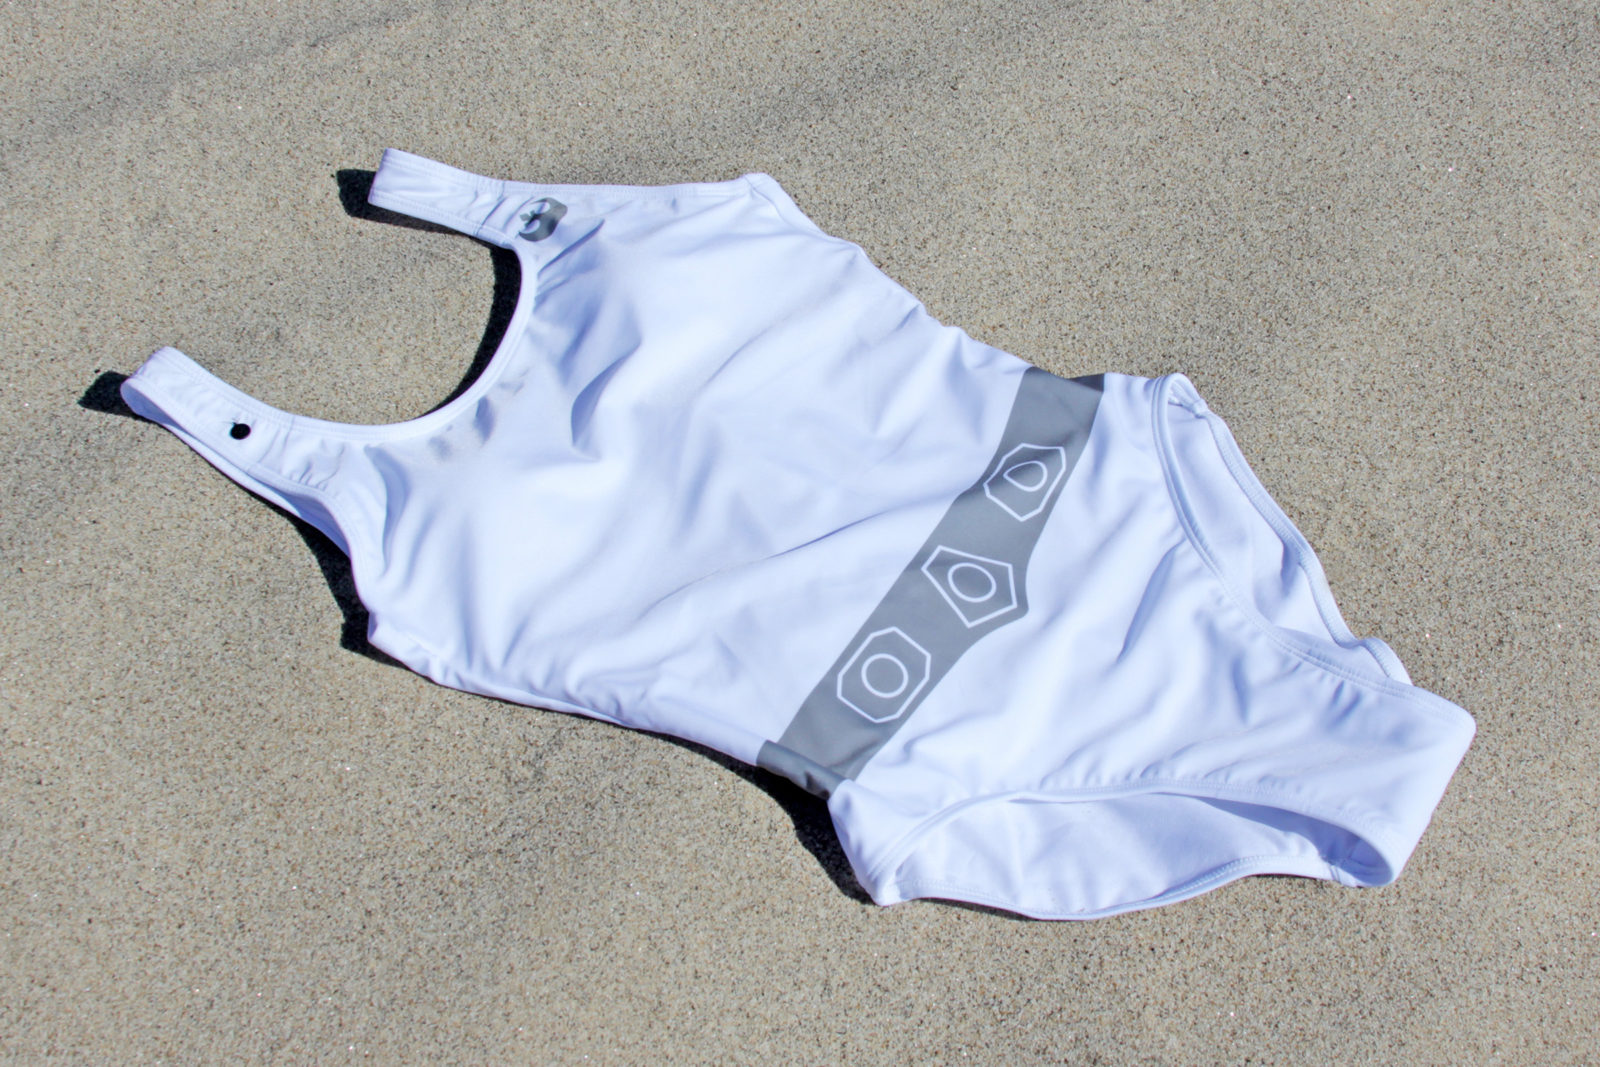 Review – Musterbrand Princess Leia Swimsuit